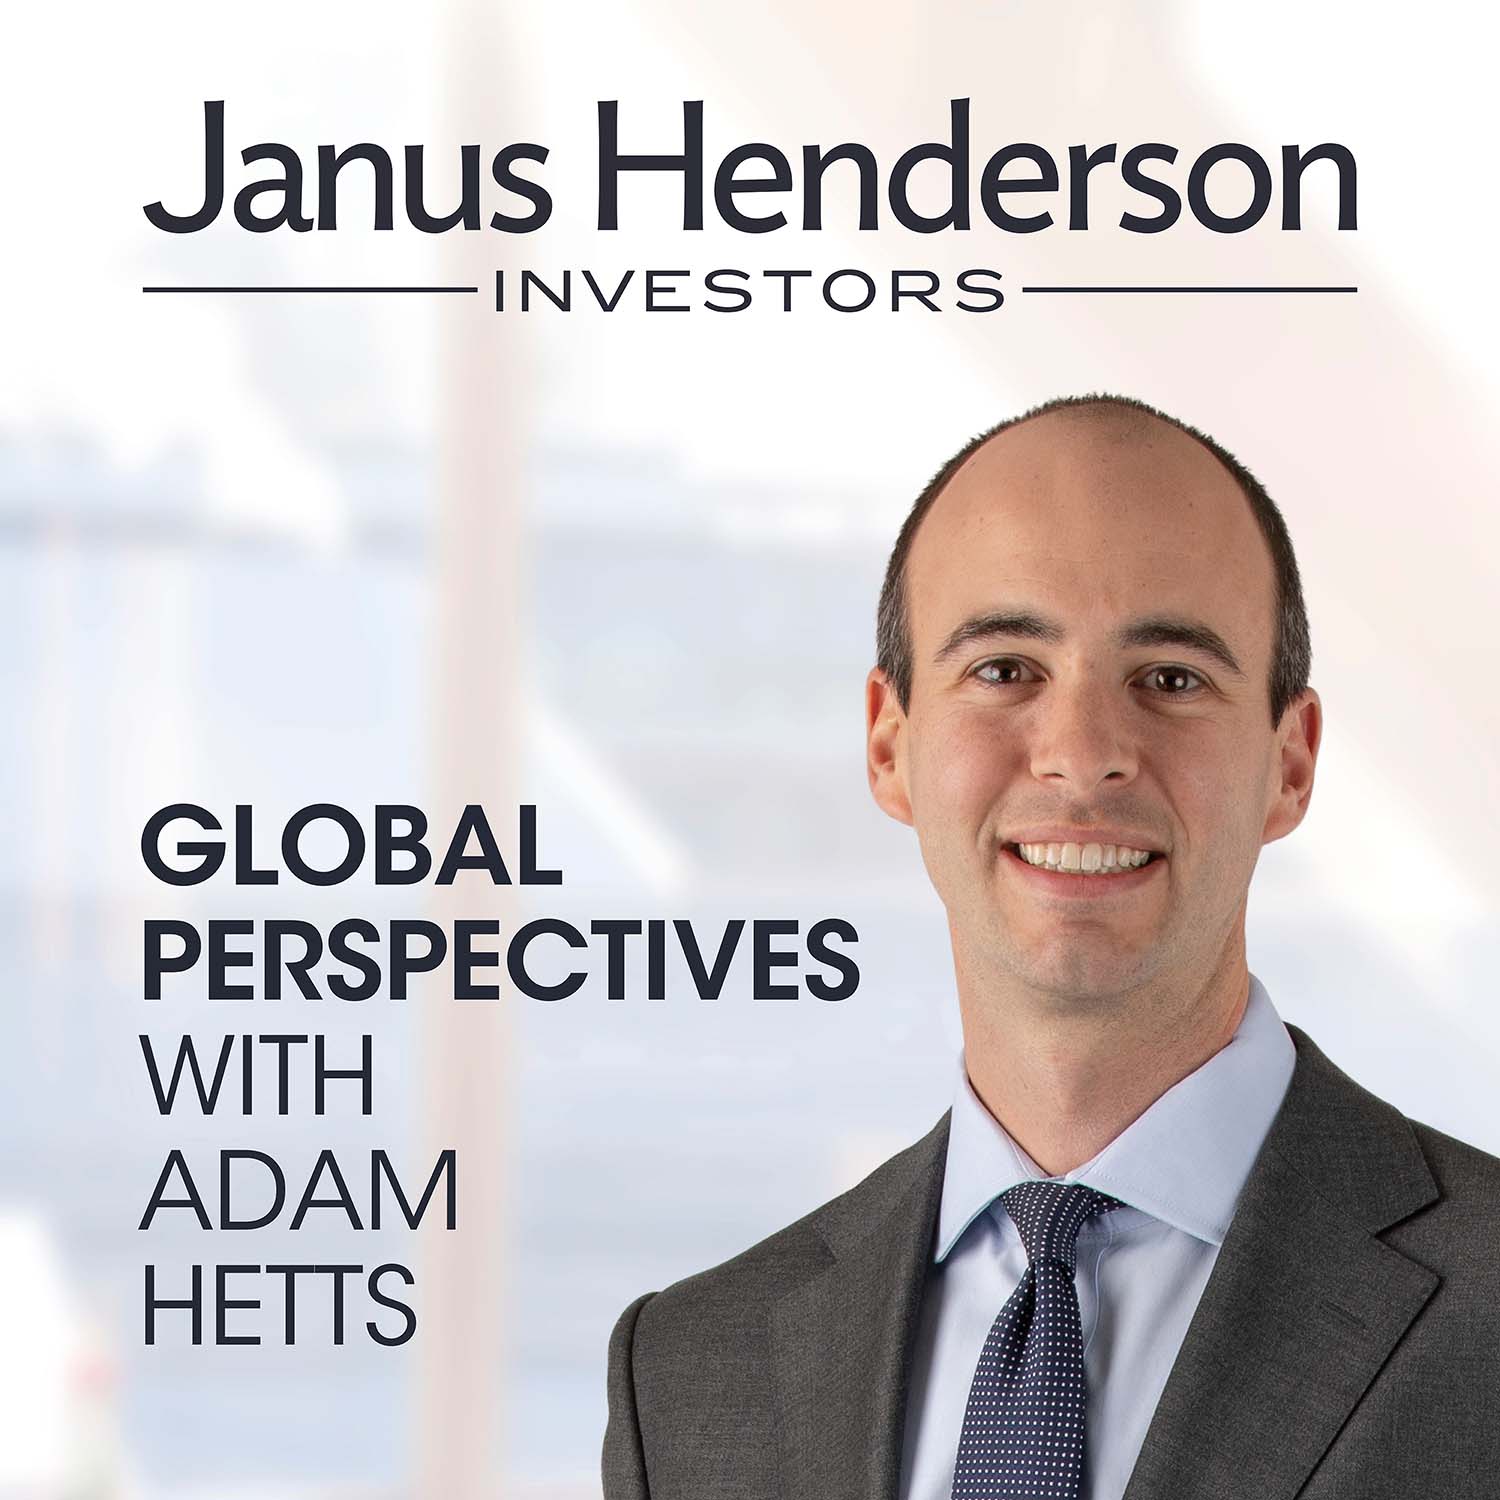 Artwork for podcast Connections - investment views from Janus Henderson (UK)